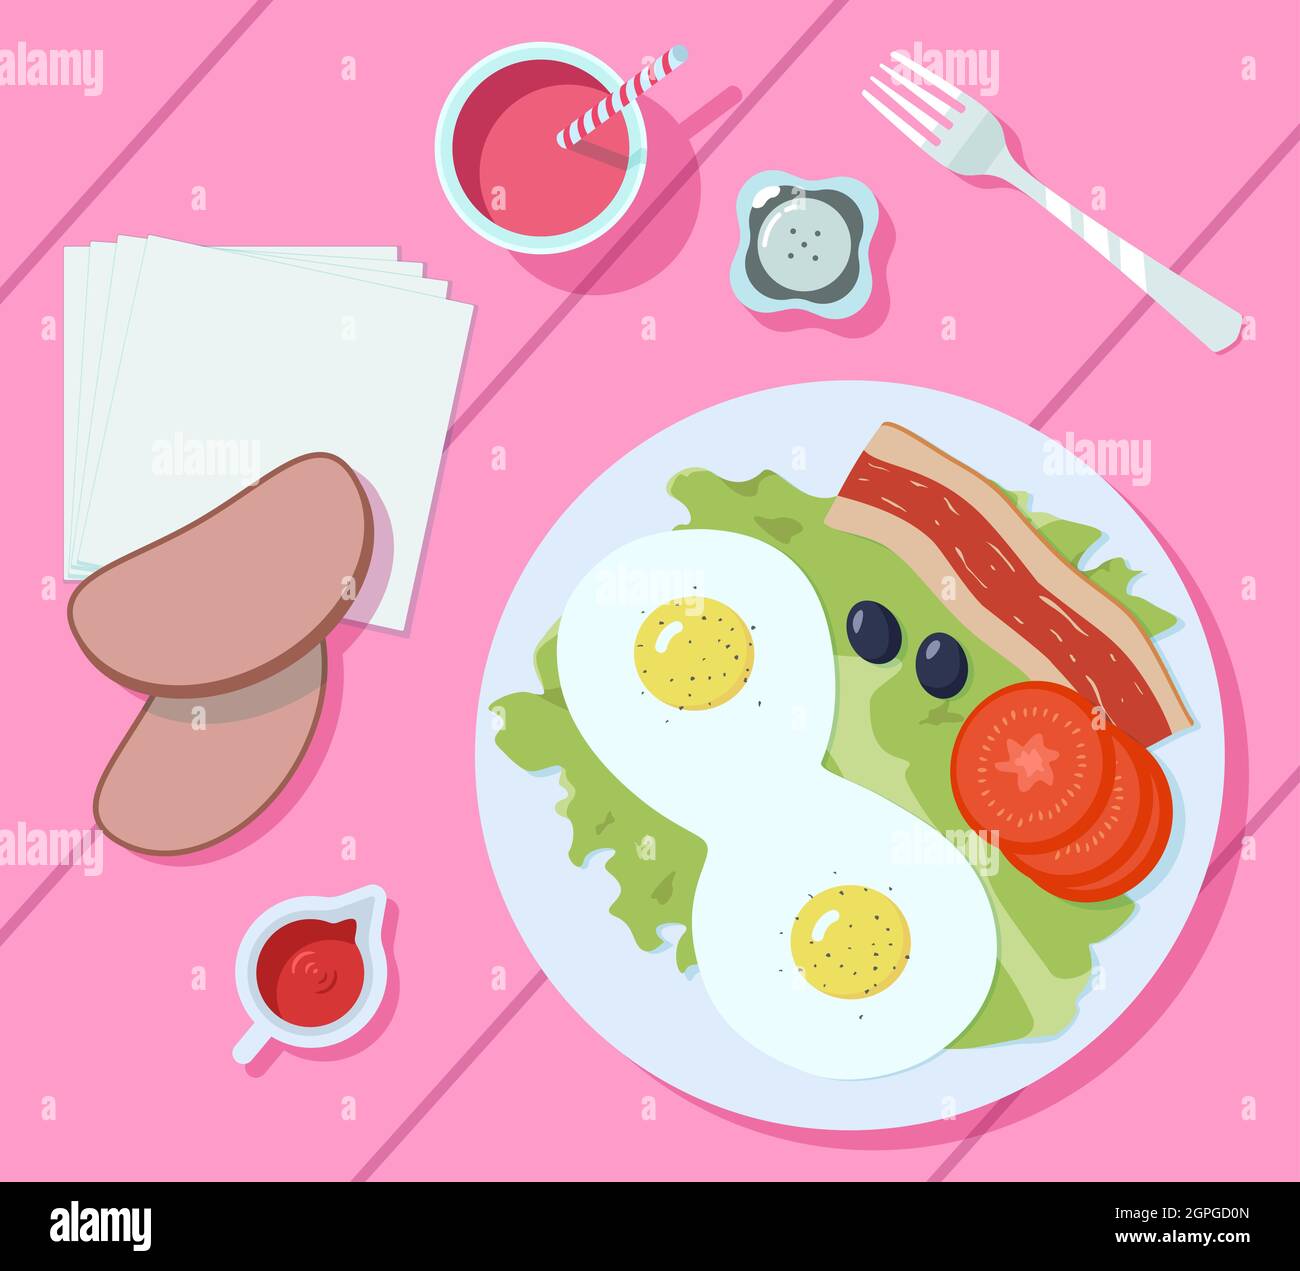 Breakfast on the table, top view. Vector illustration of a delicious morning meal, juice, bread and fried eggs. Flat style. Stock Vector